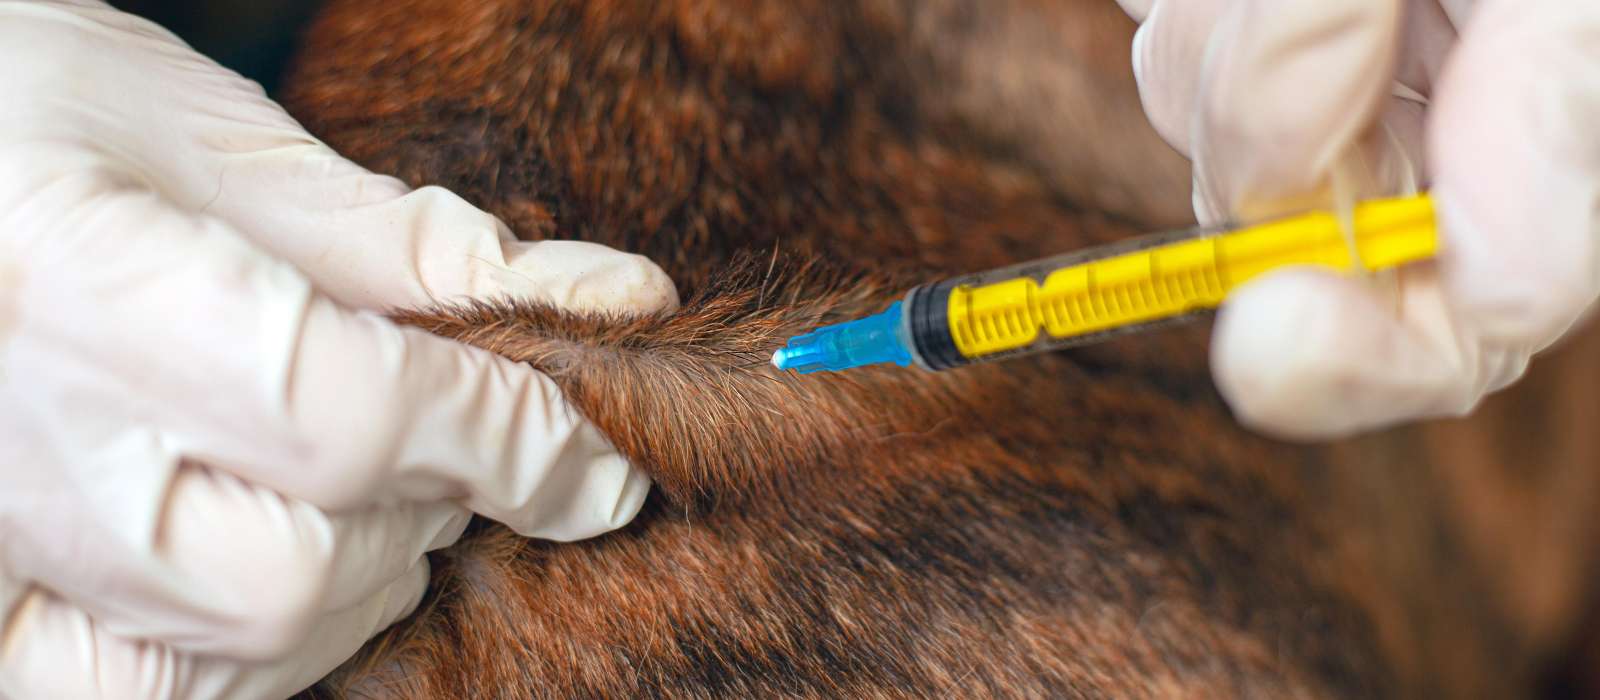 Person wearing gloves gives an animal an injection